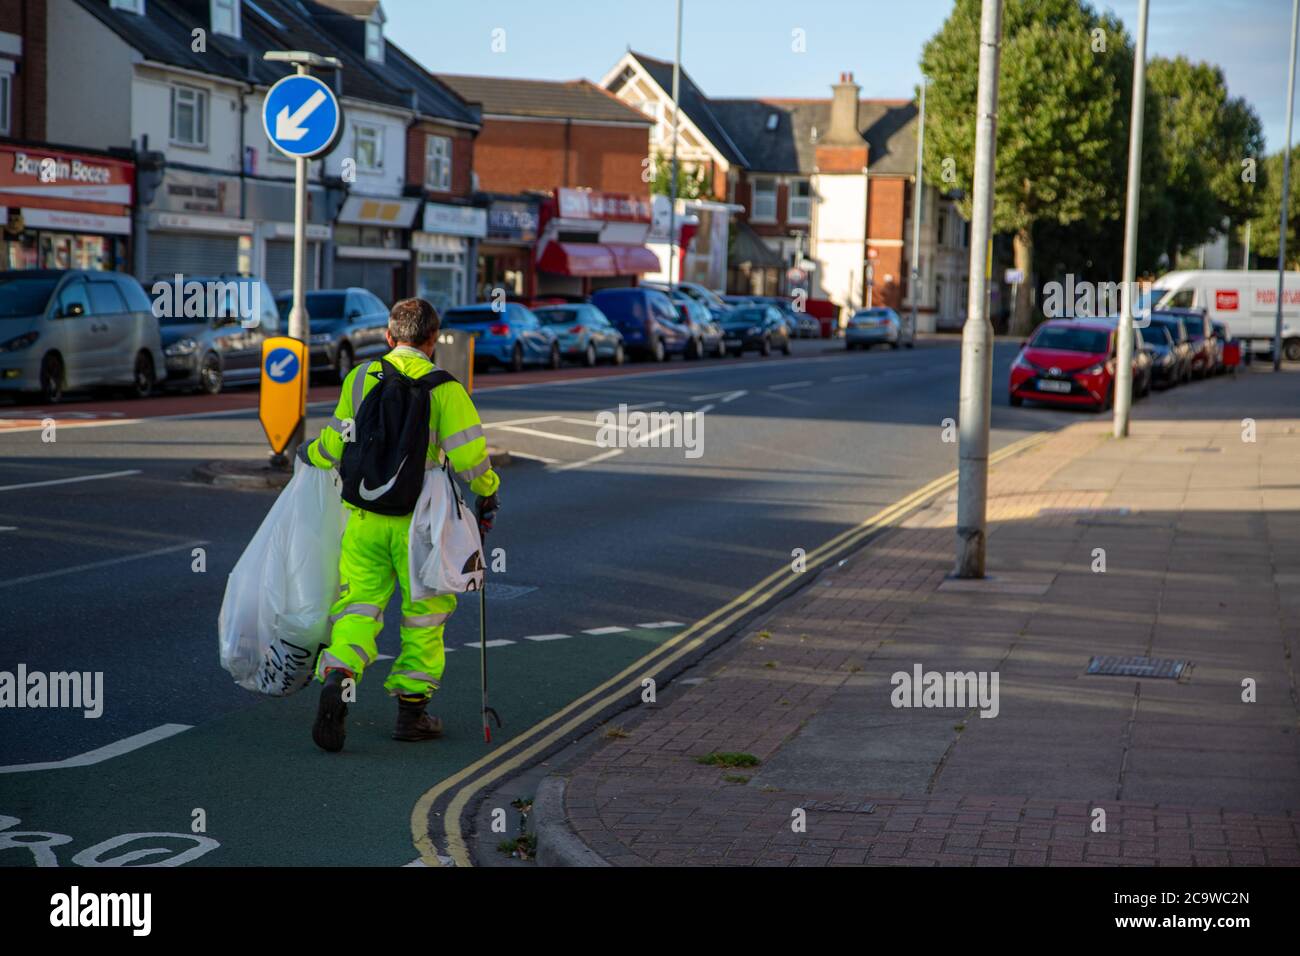 A council worker in high visibility clothing litter picking in the street Stock Photo